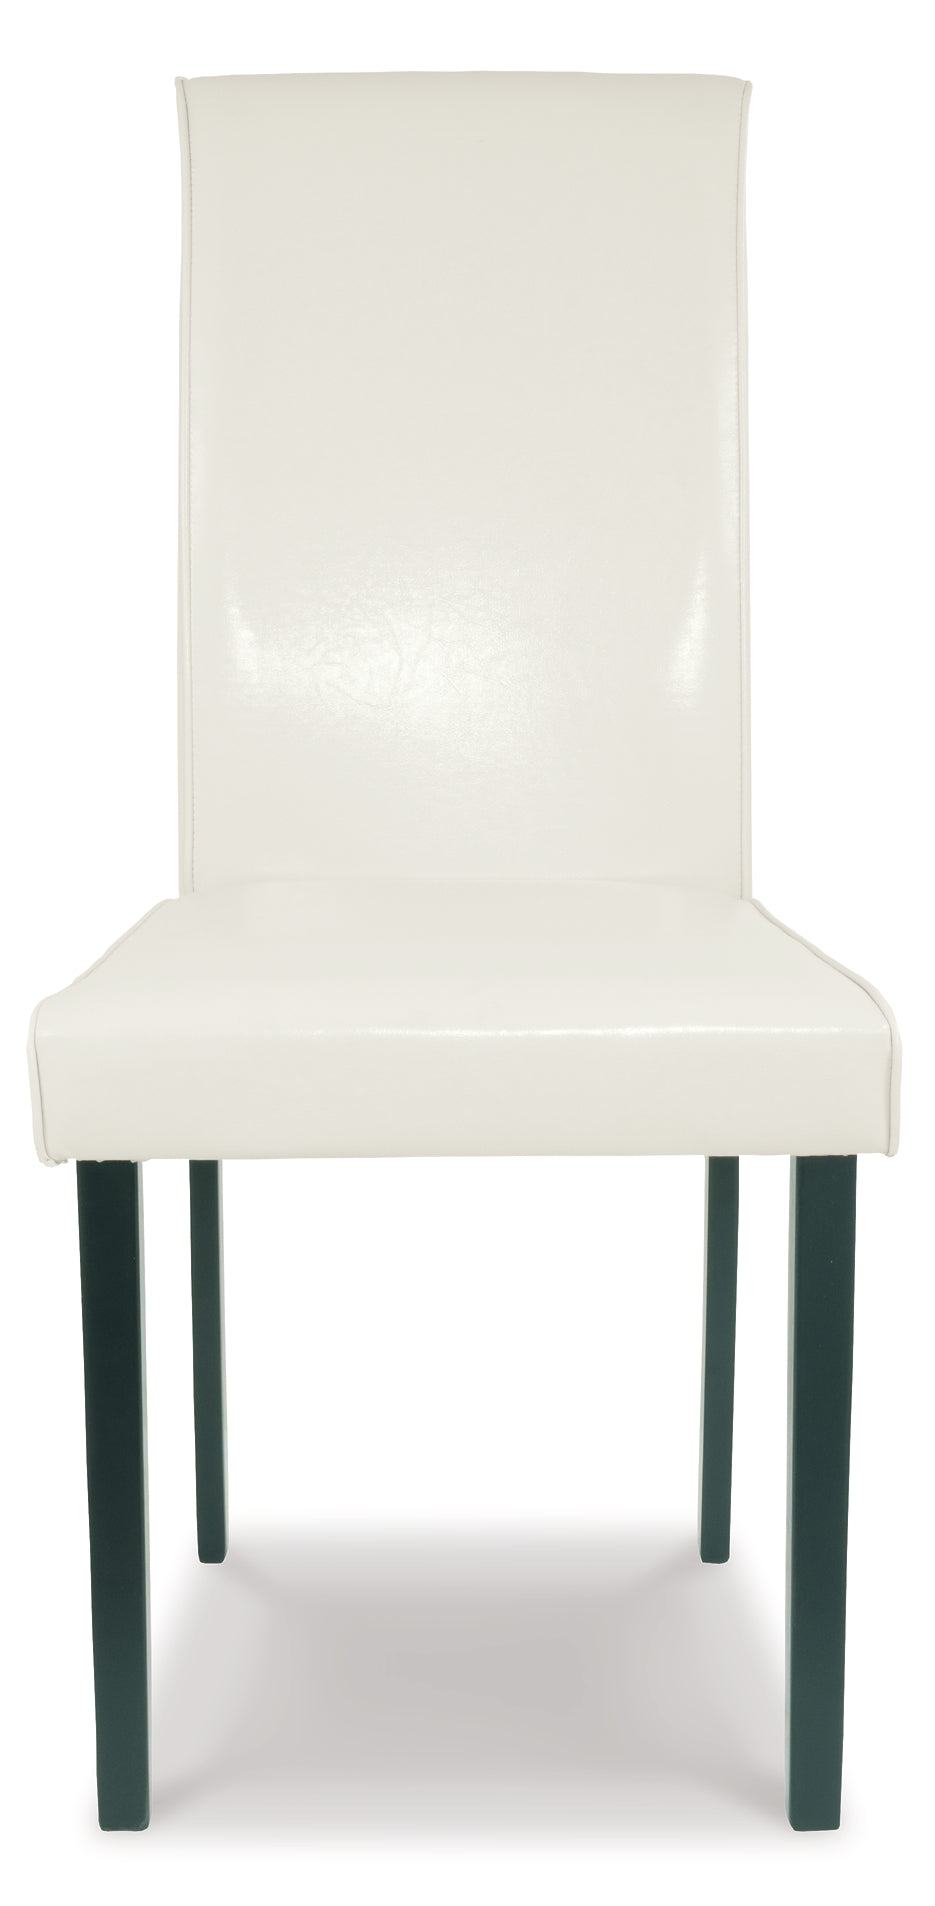 Kimonte Dining Chair (Set of 2) JB's Furniture  Home Furniture, Home Decor, Furniture Store